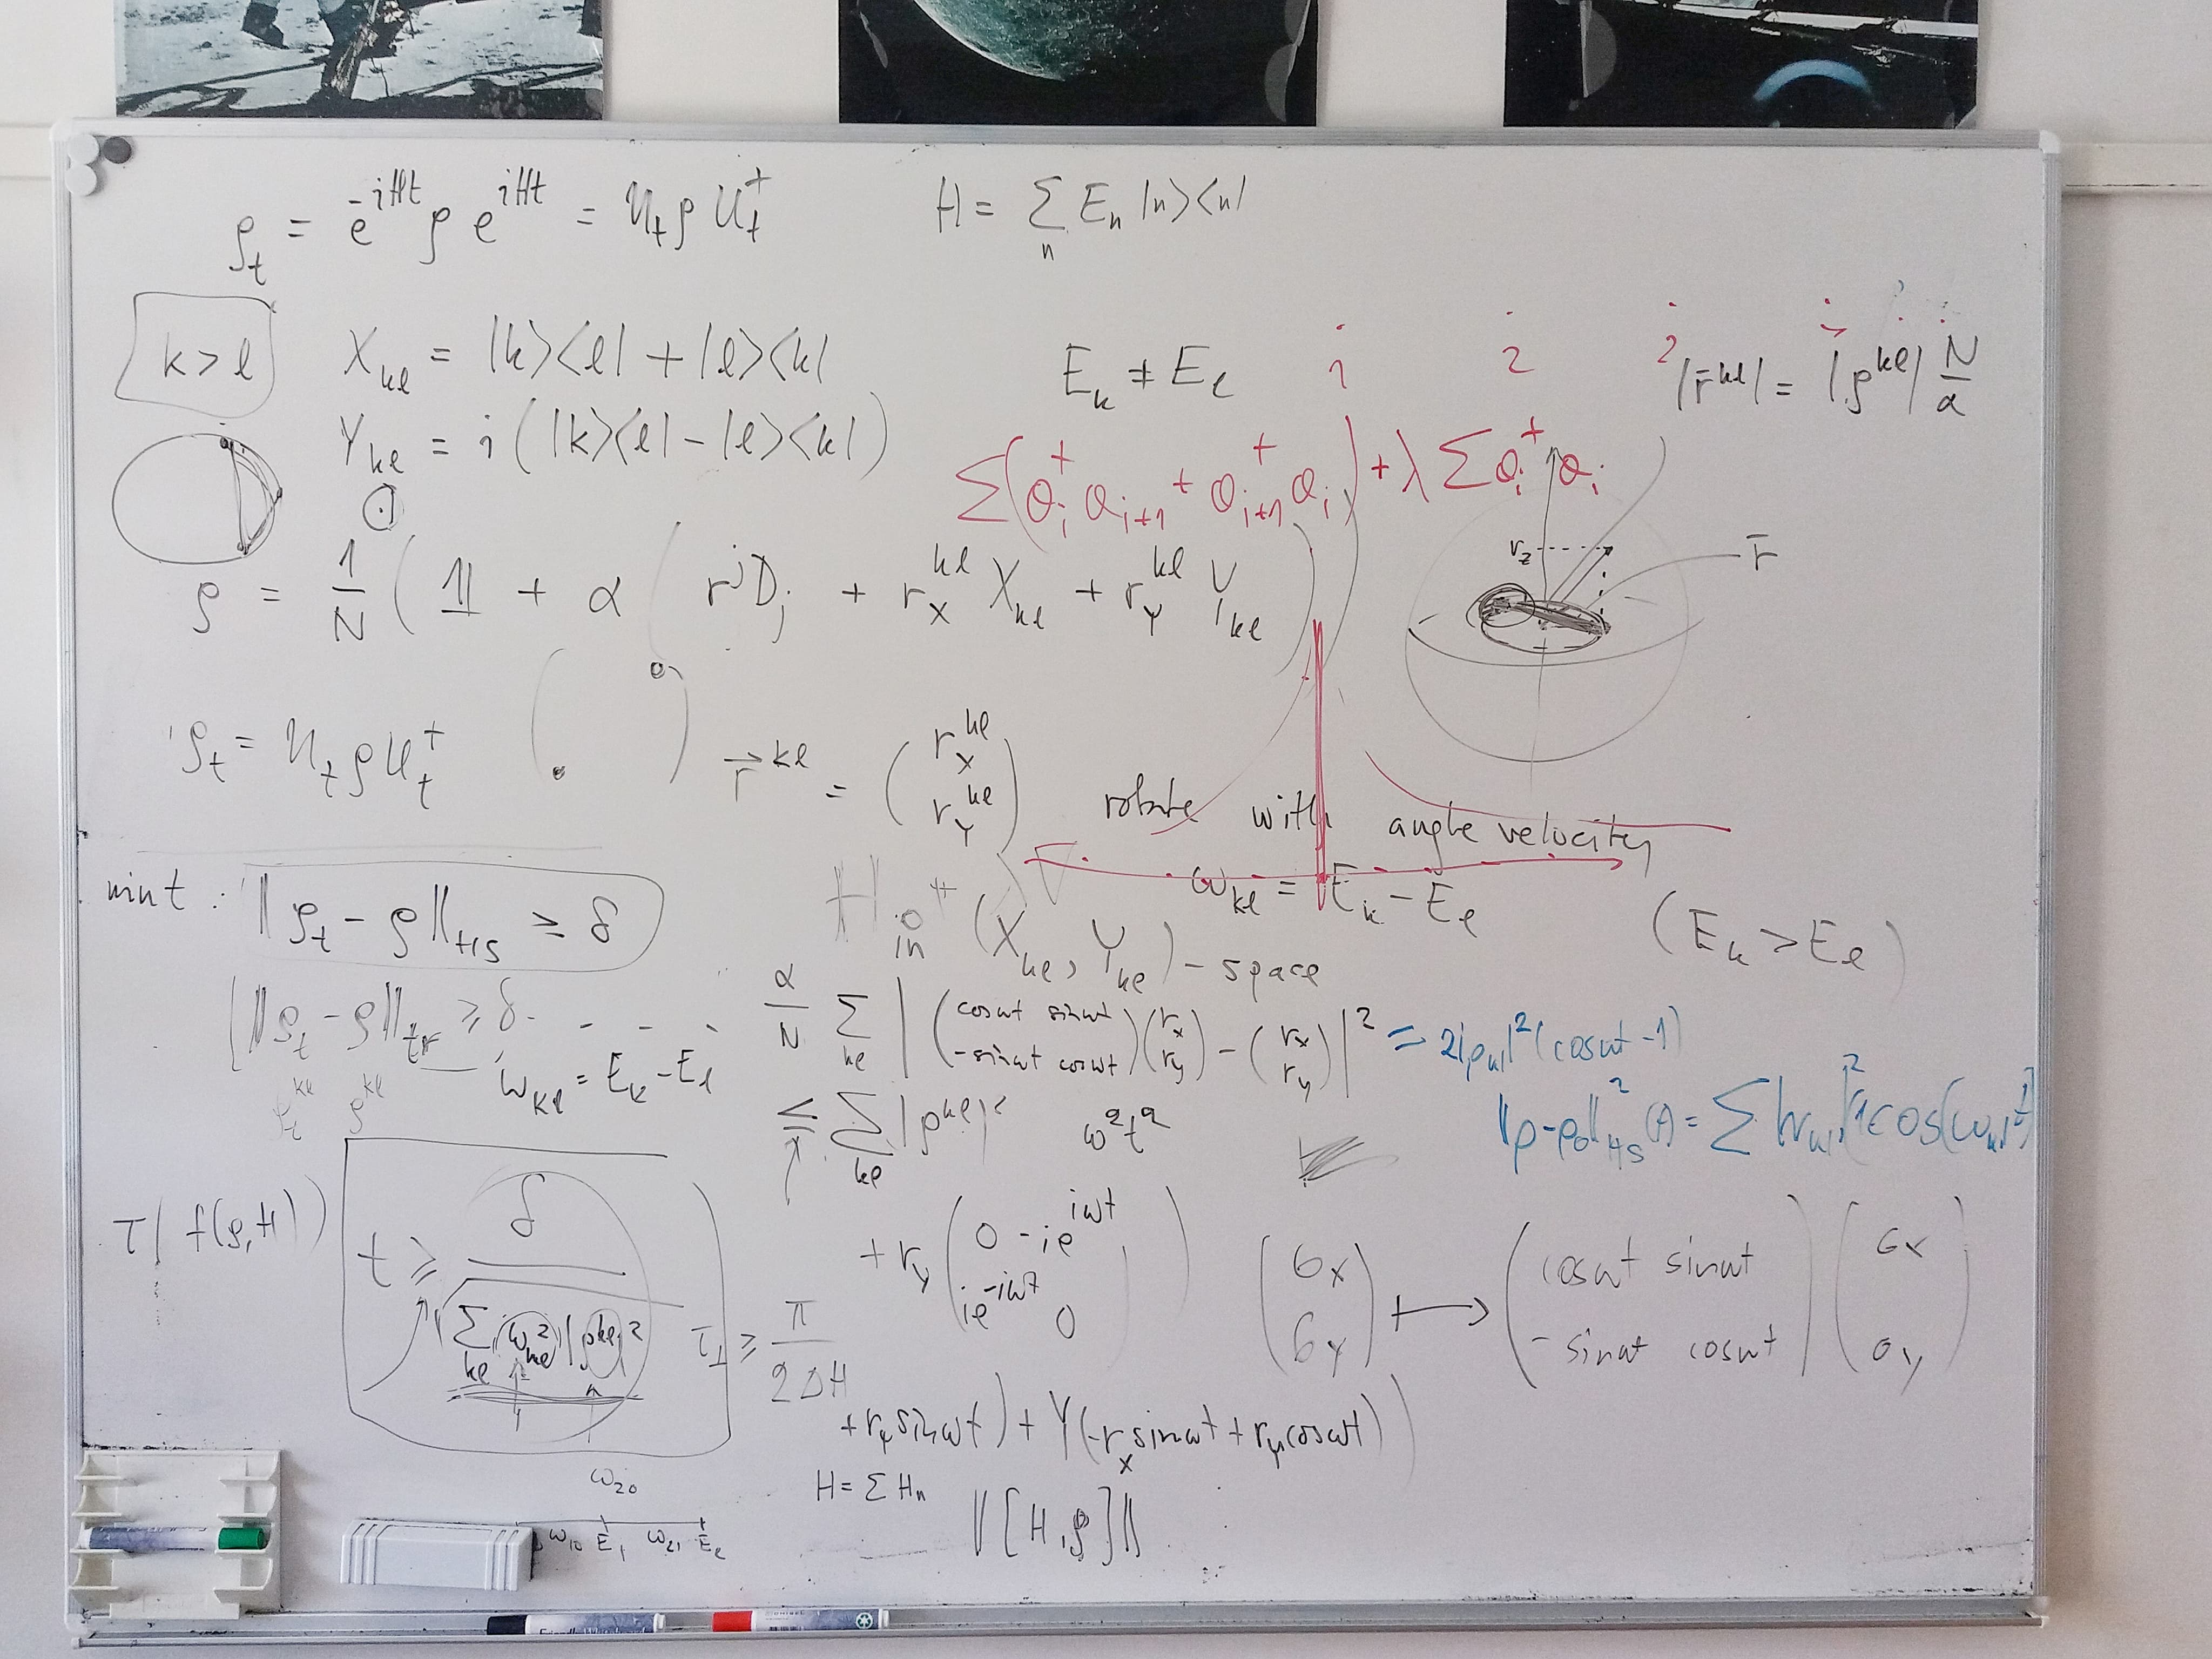 Photo of a whiteboard, with permission